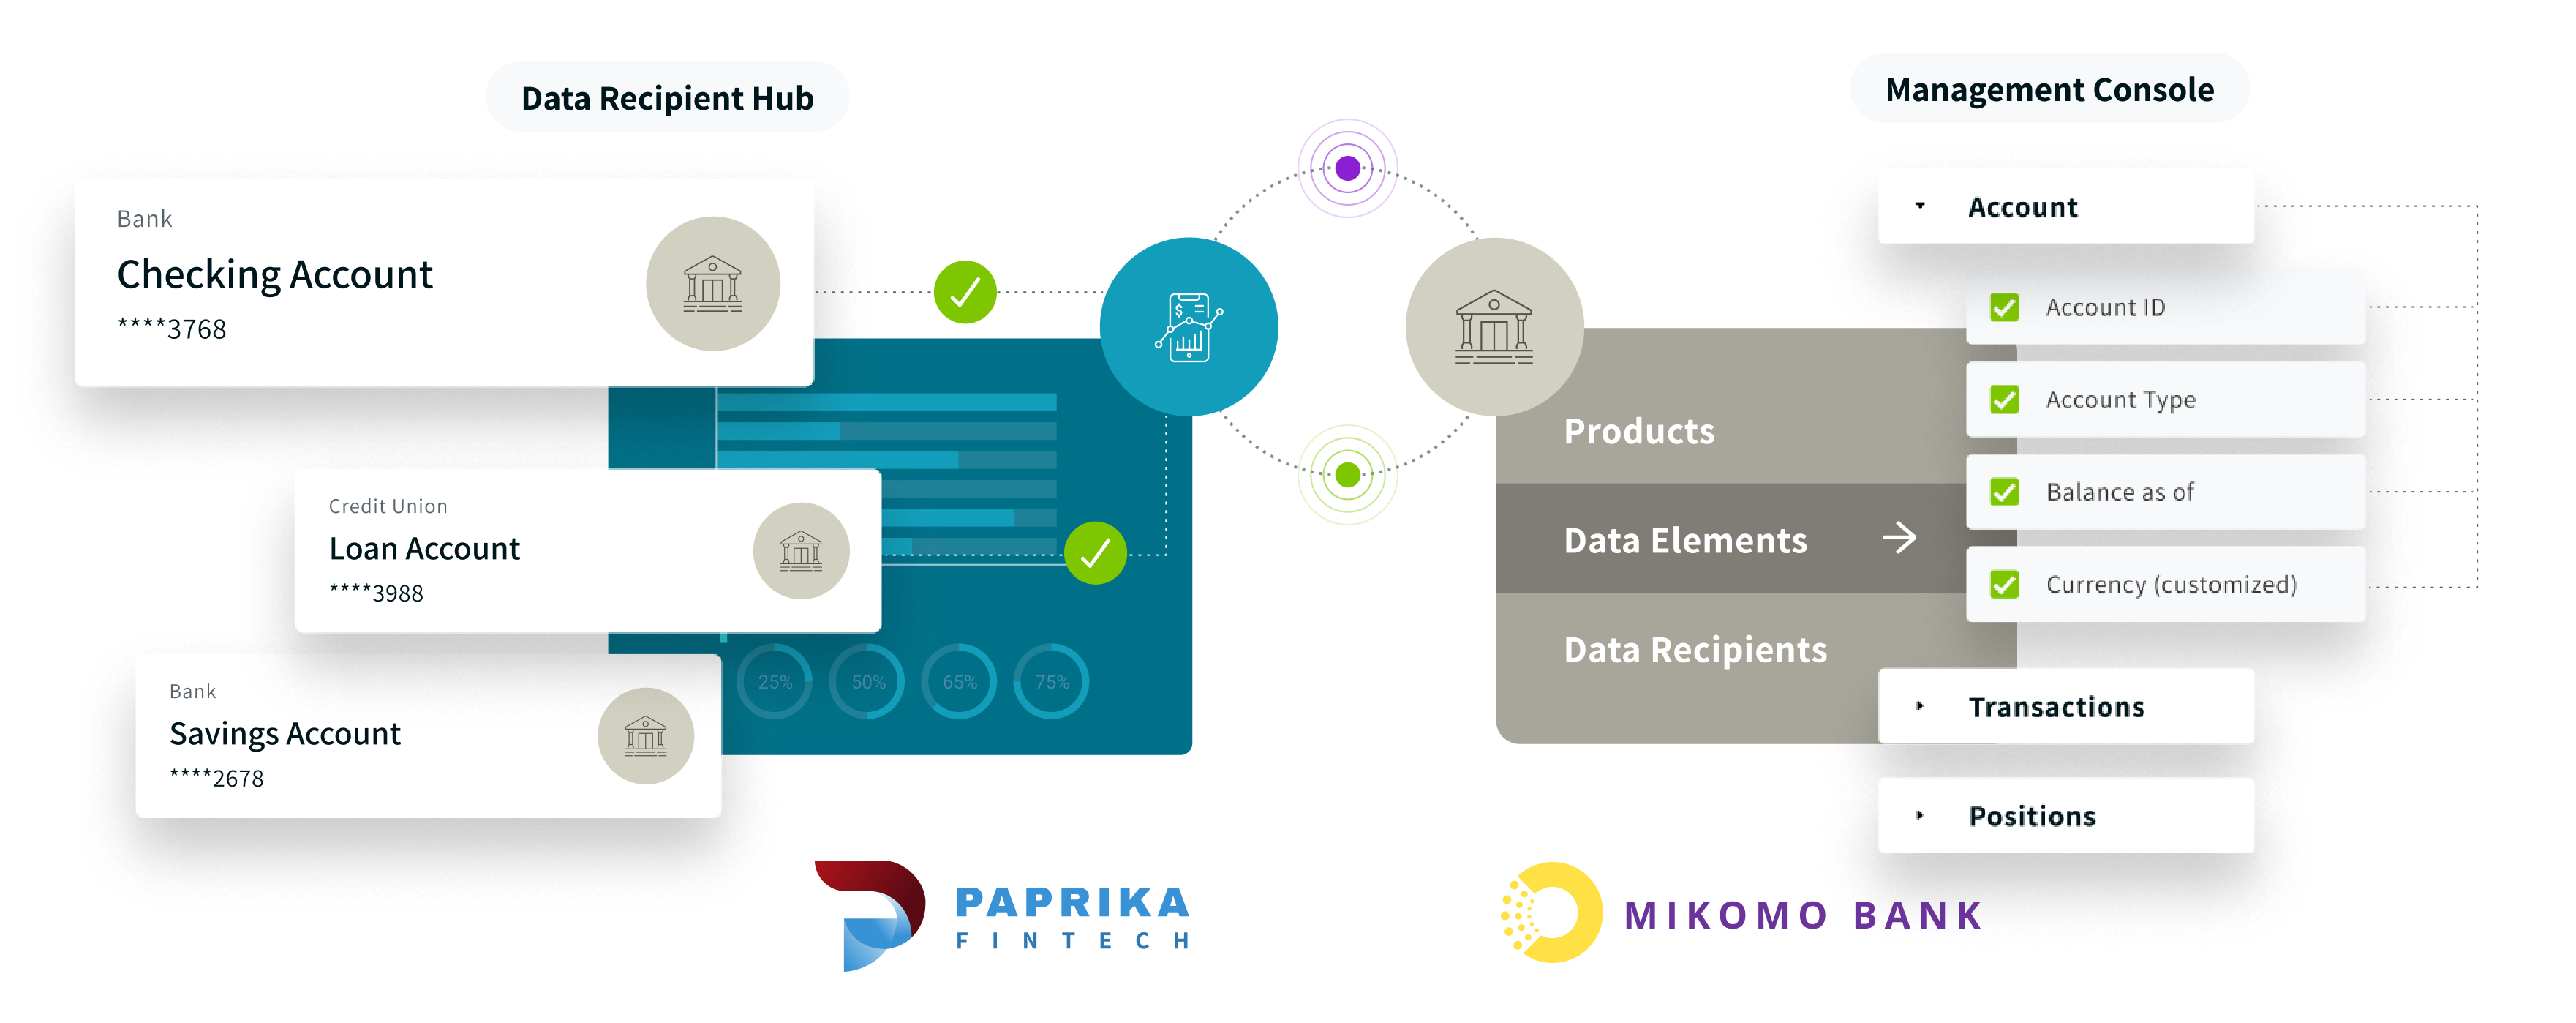 Akoya apps: Data Recipient Hub and Management Console